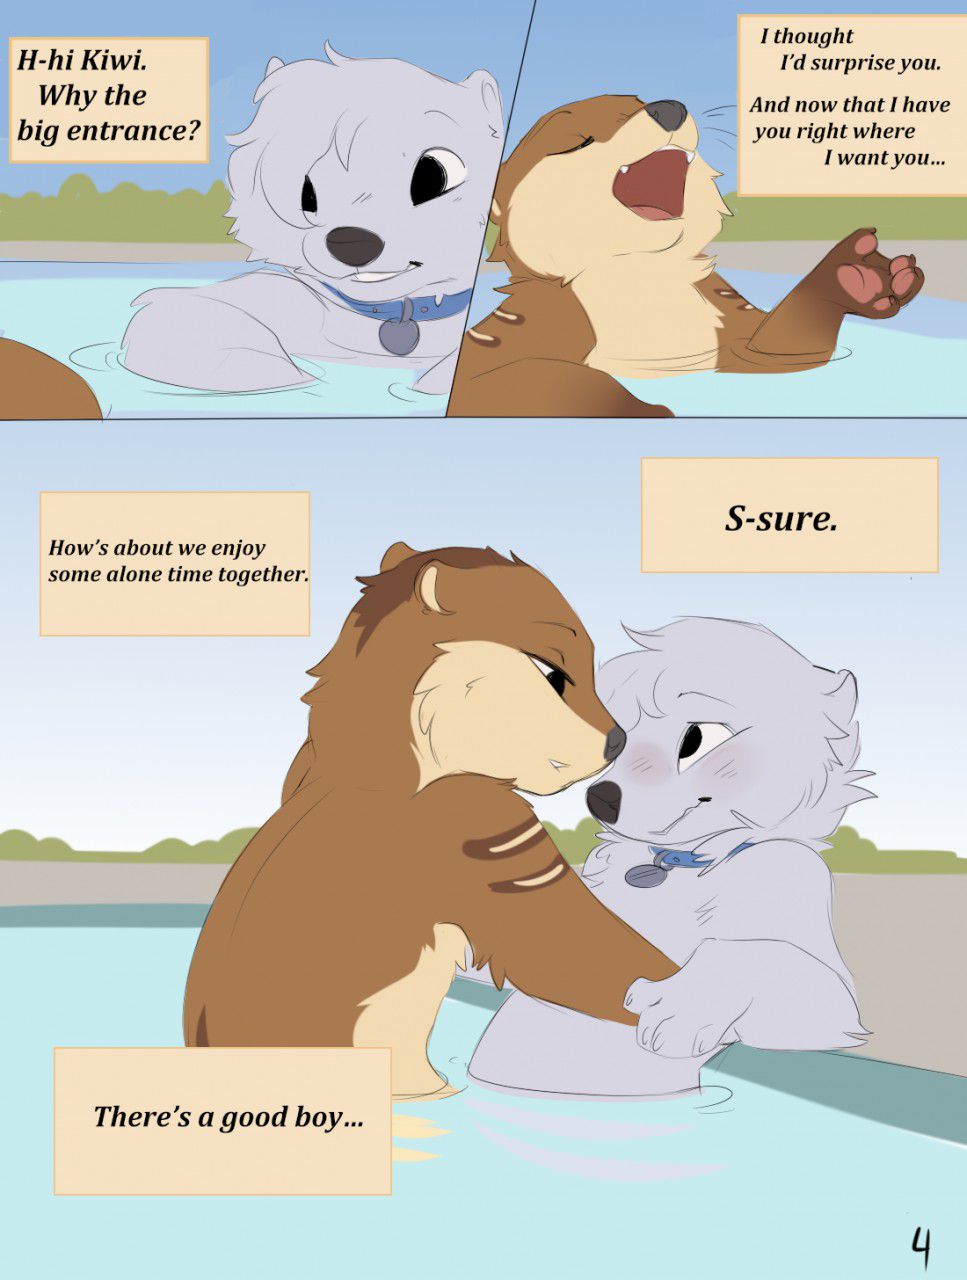 Personal Otter Space by ShuryaSHISH (Ongoing) 4